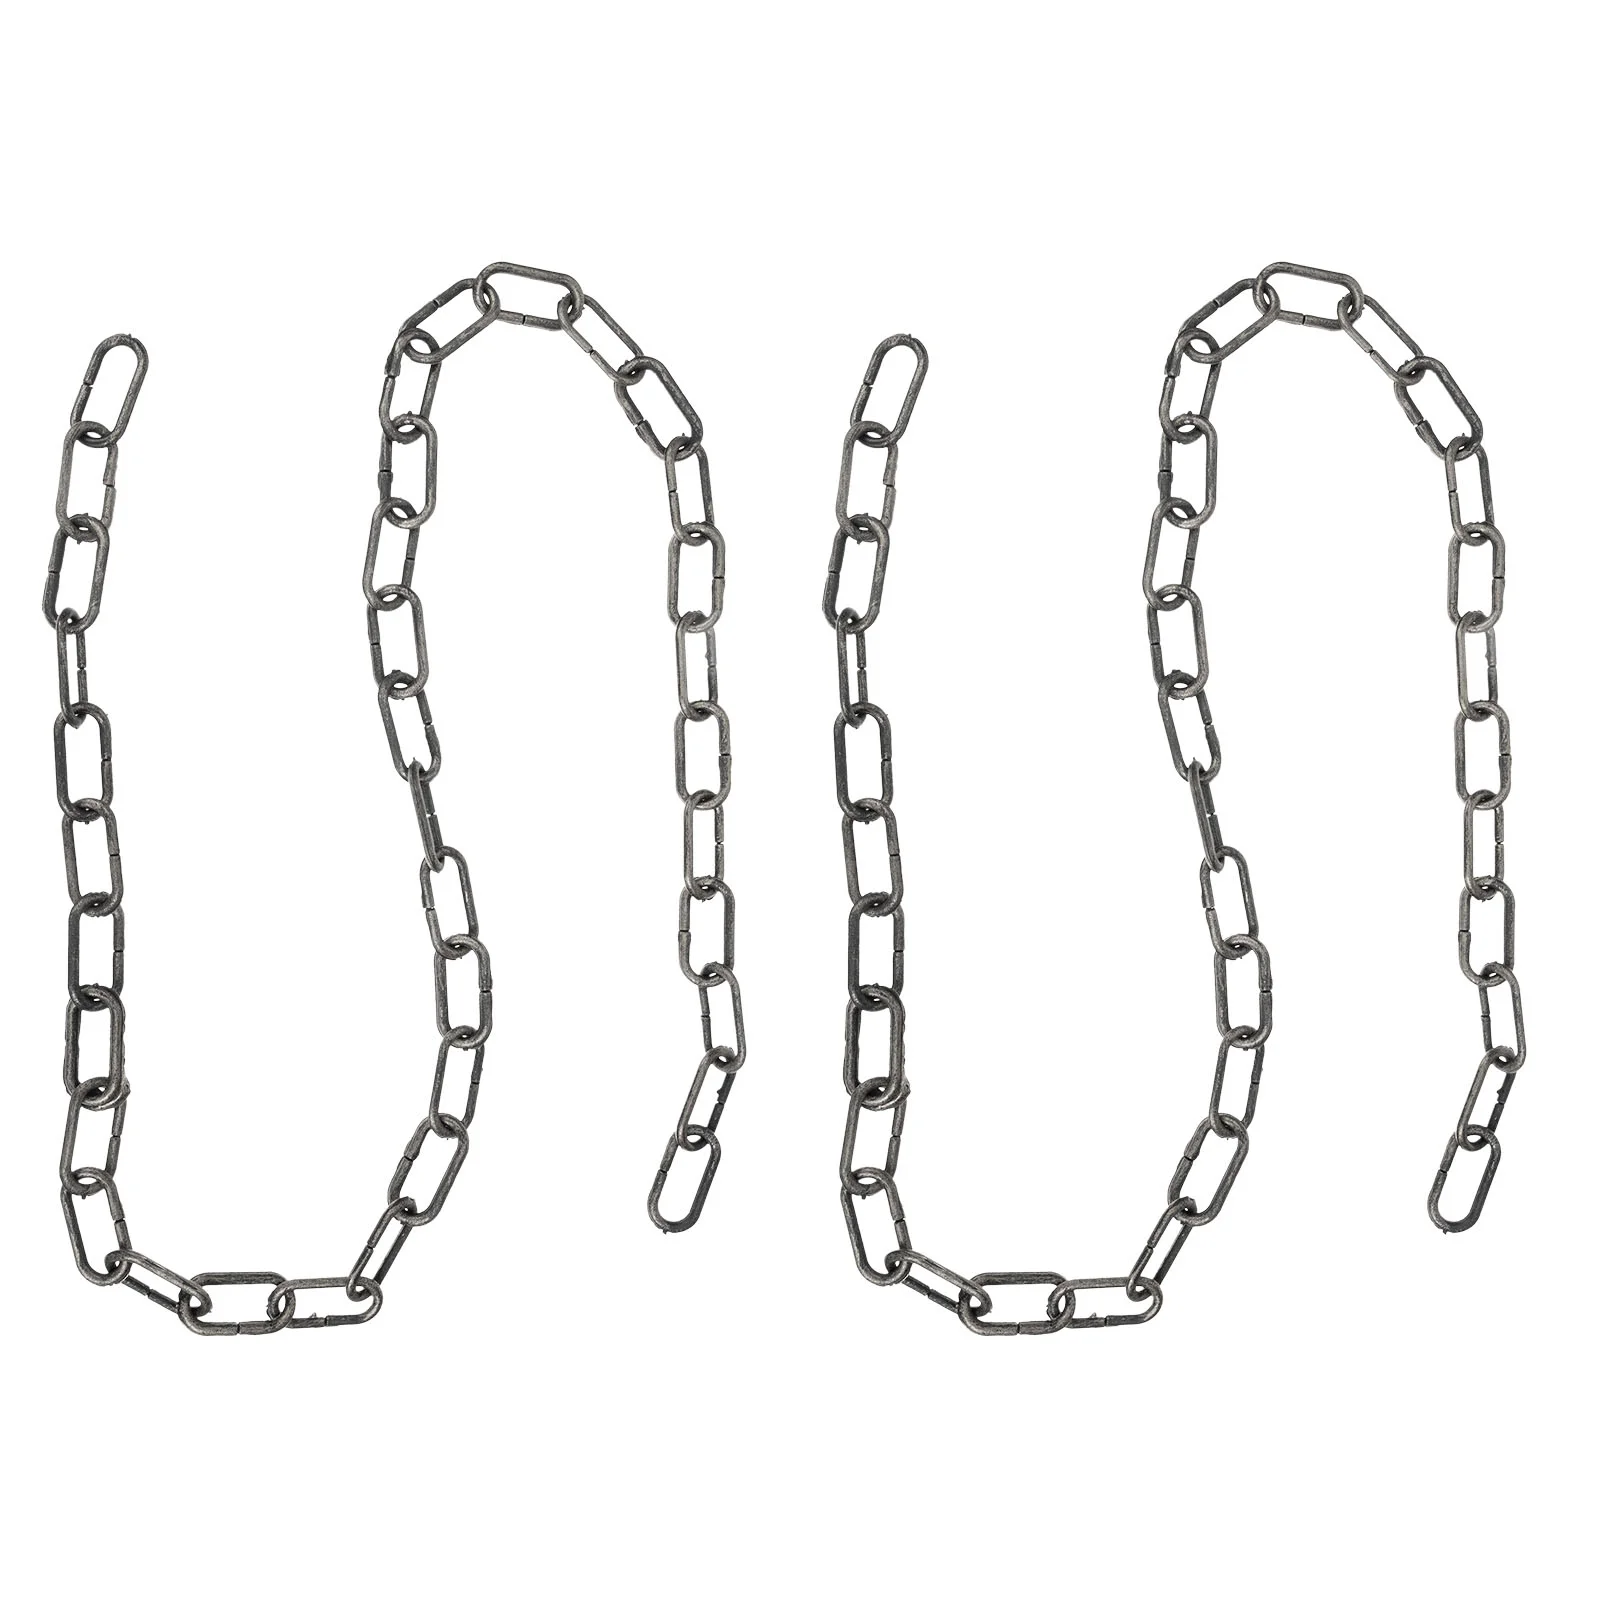 

2 Pcs Simulated Iron Chain Prisoner Chains Halloween Fetters Supply Fake Barrier Costumes Kids Plastic Prop Chew Toys Handcuffs